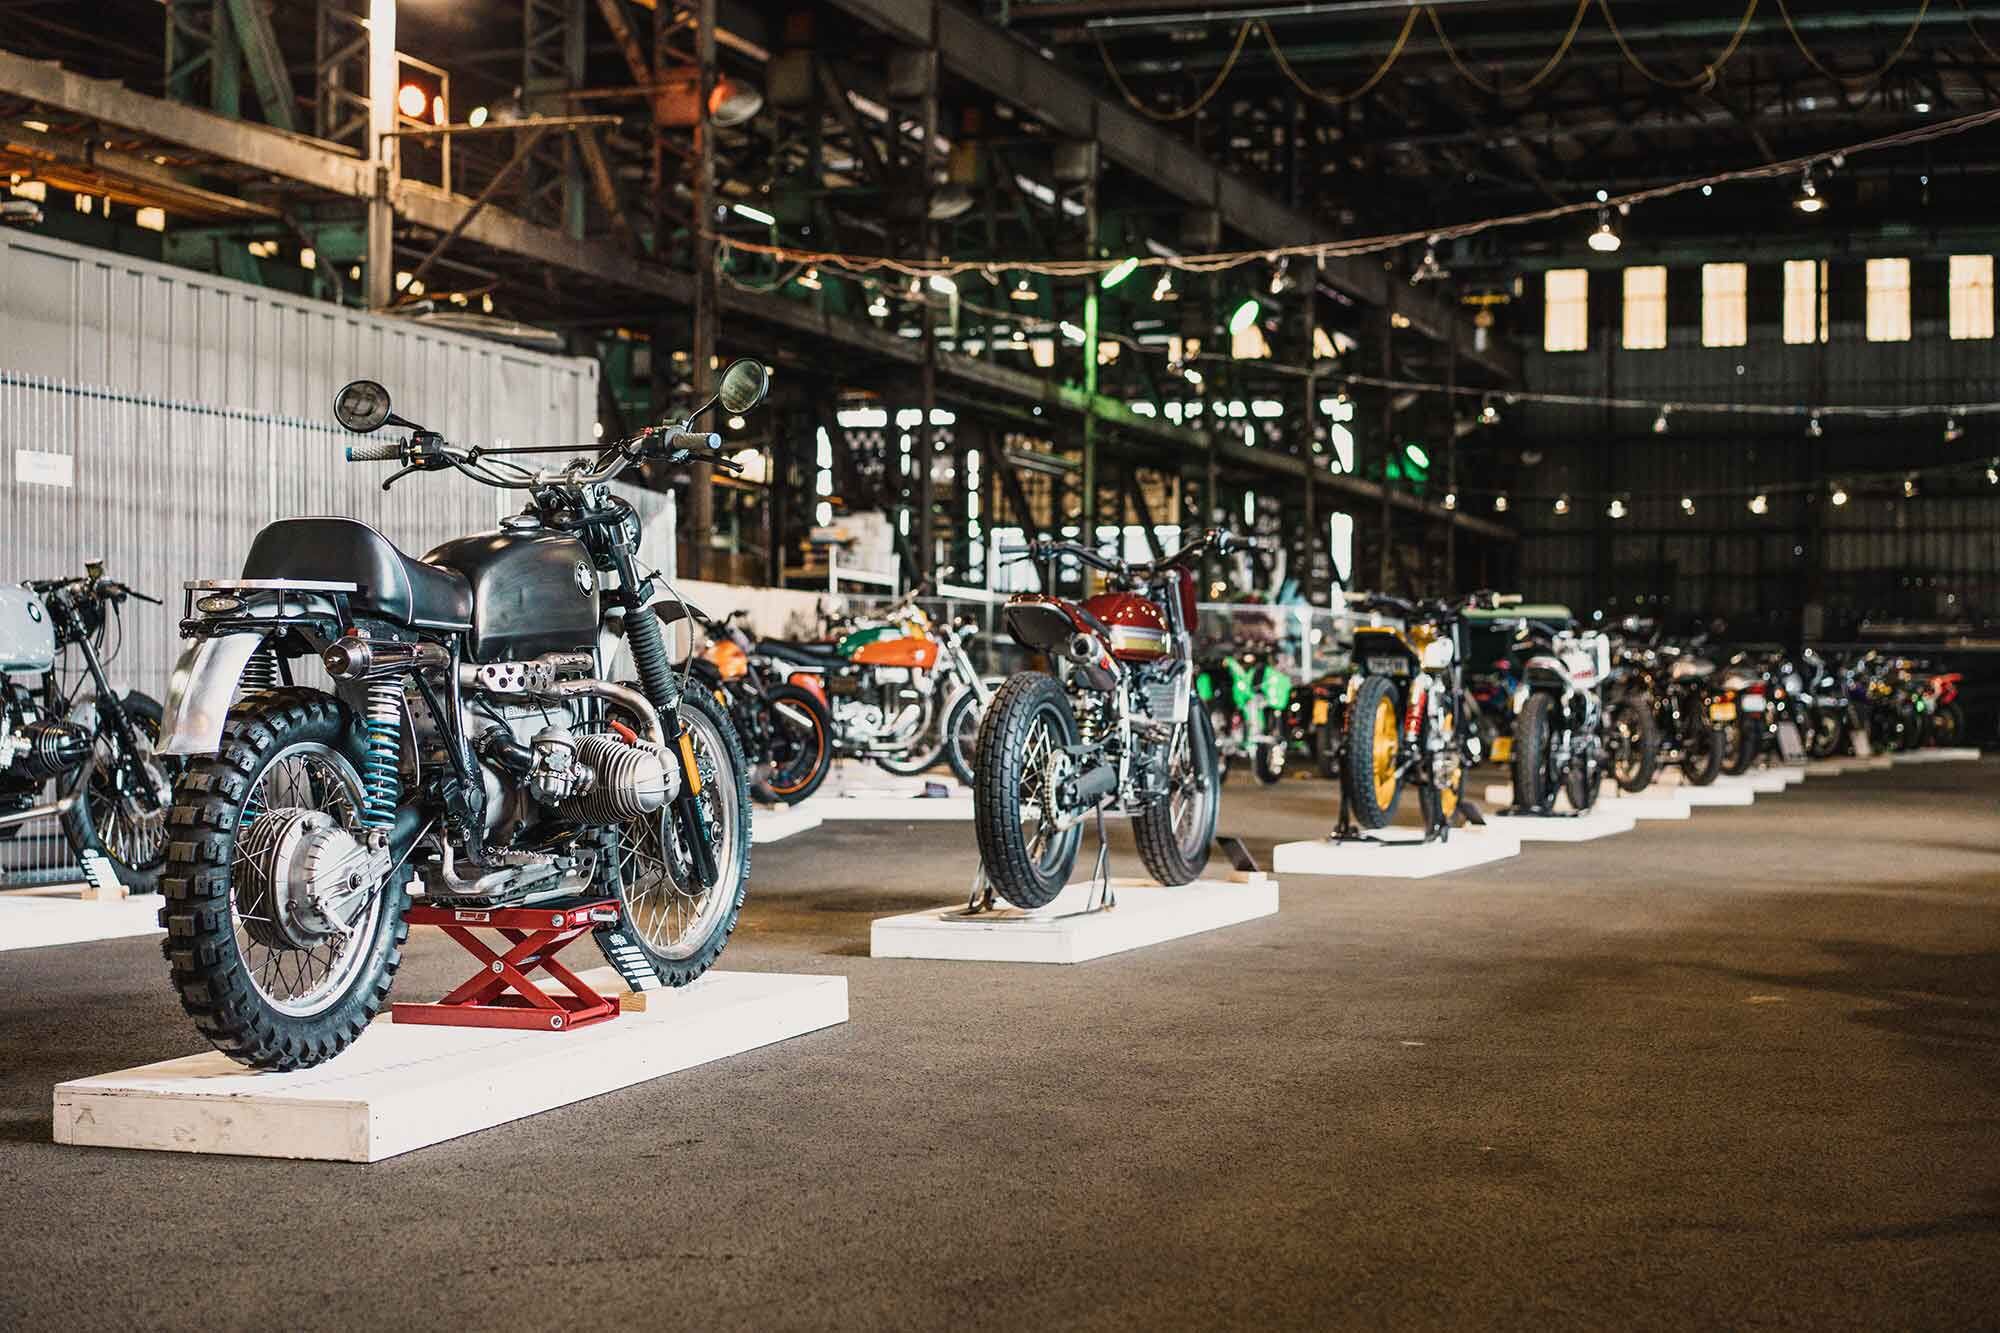 As always, the diversity of custom bikes on display at the One Moto Show is one of its biggest strengths.